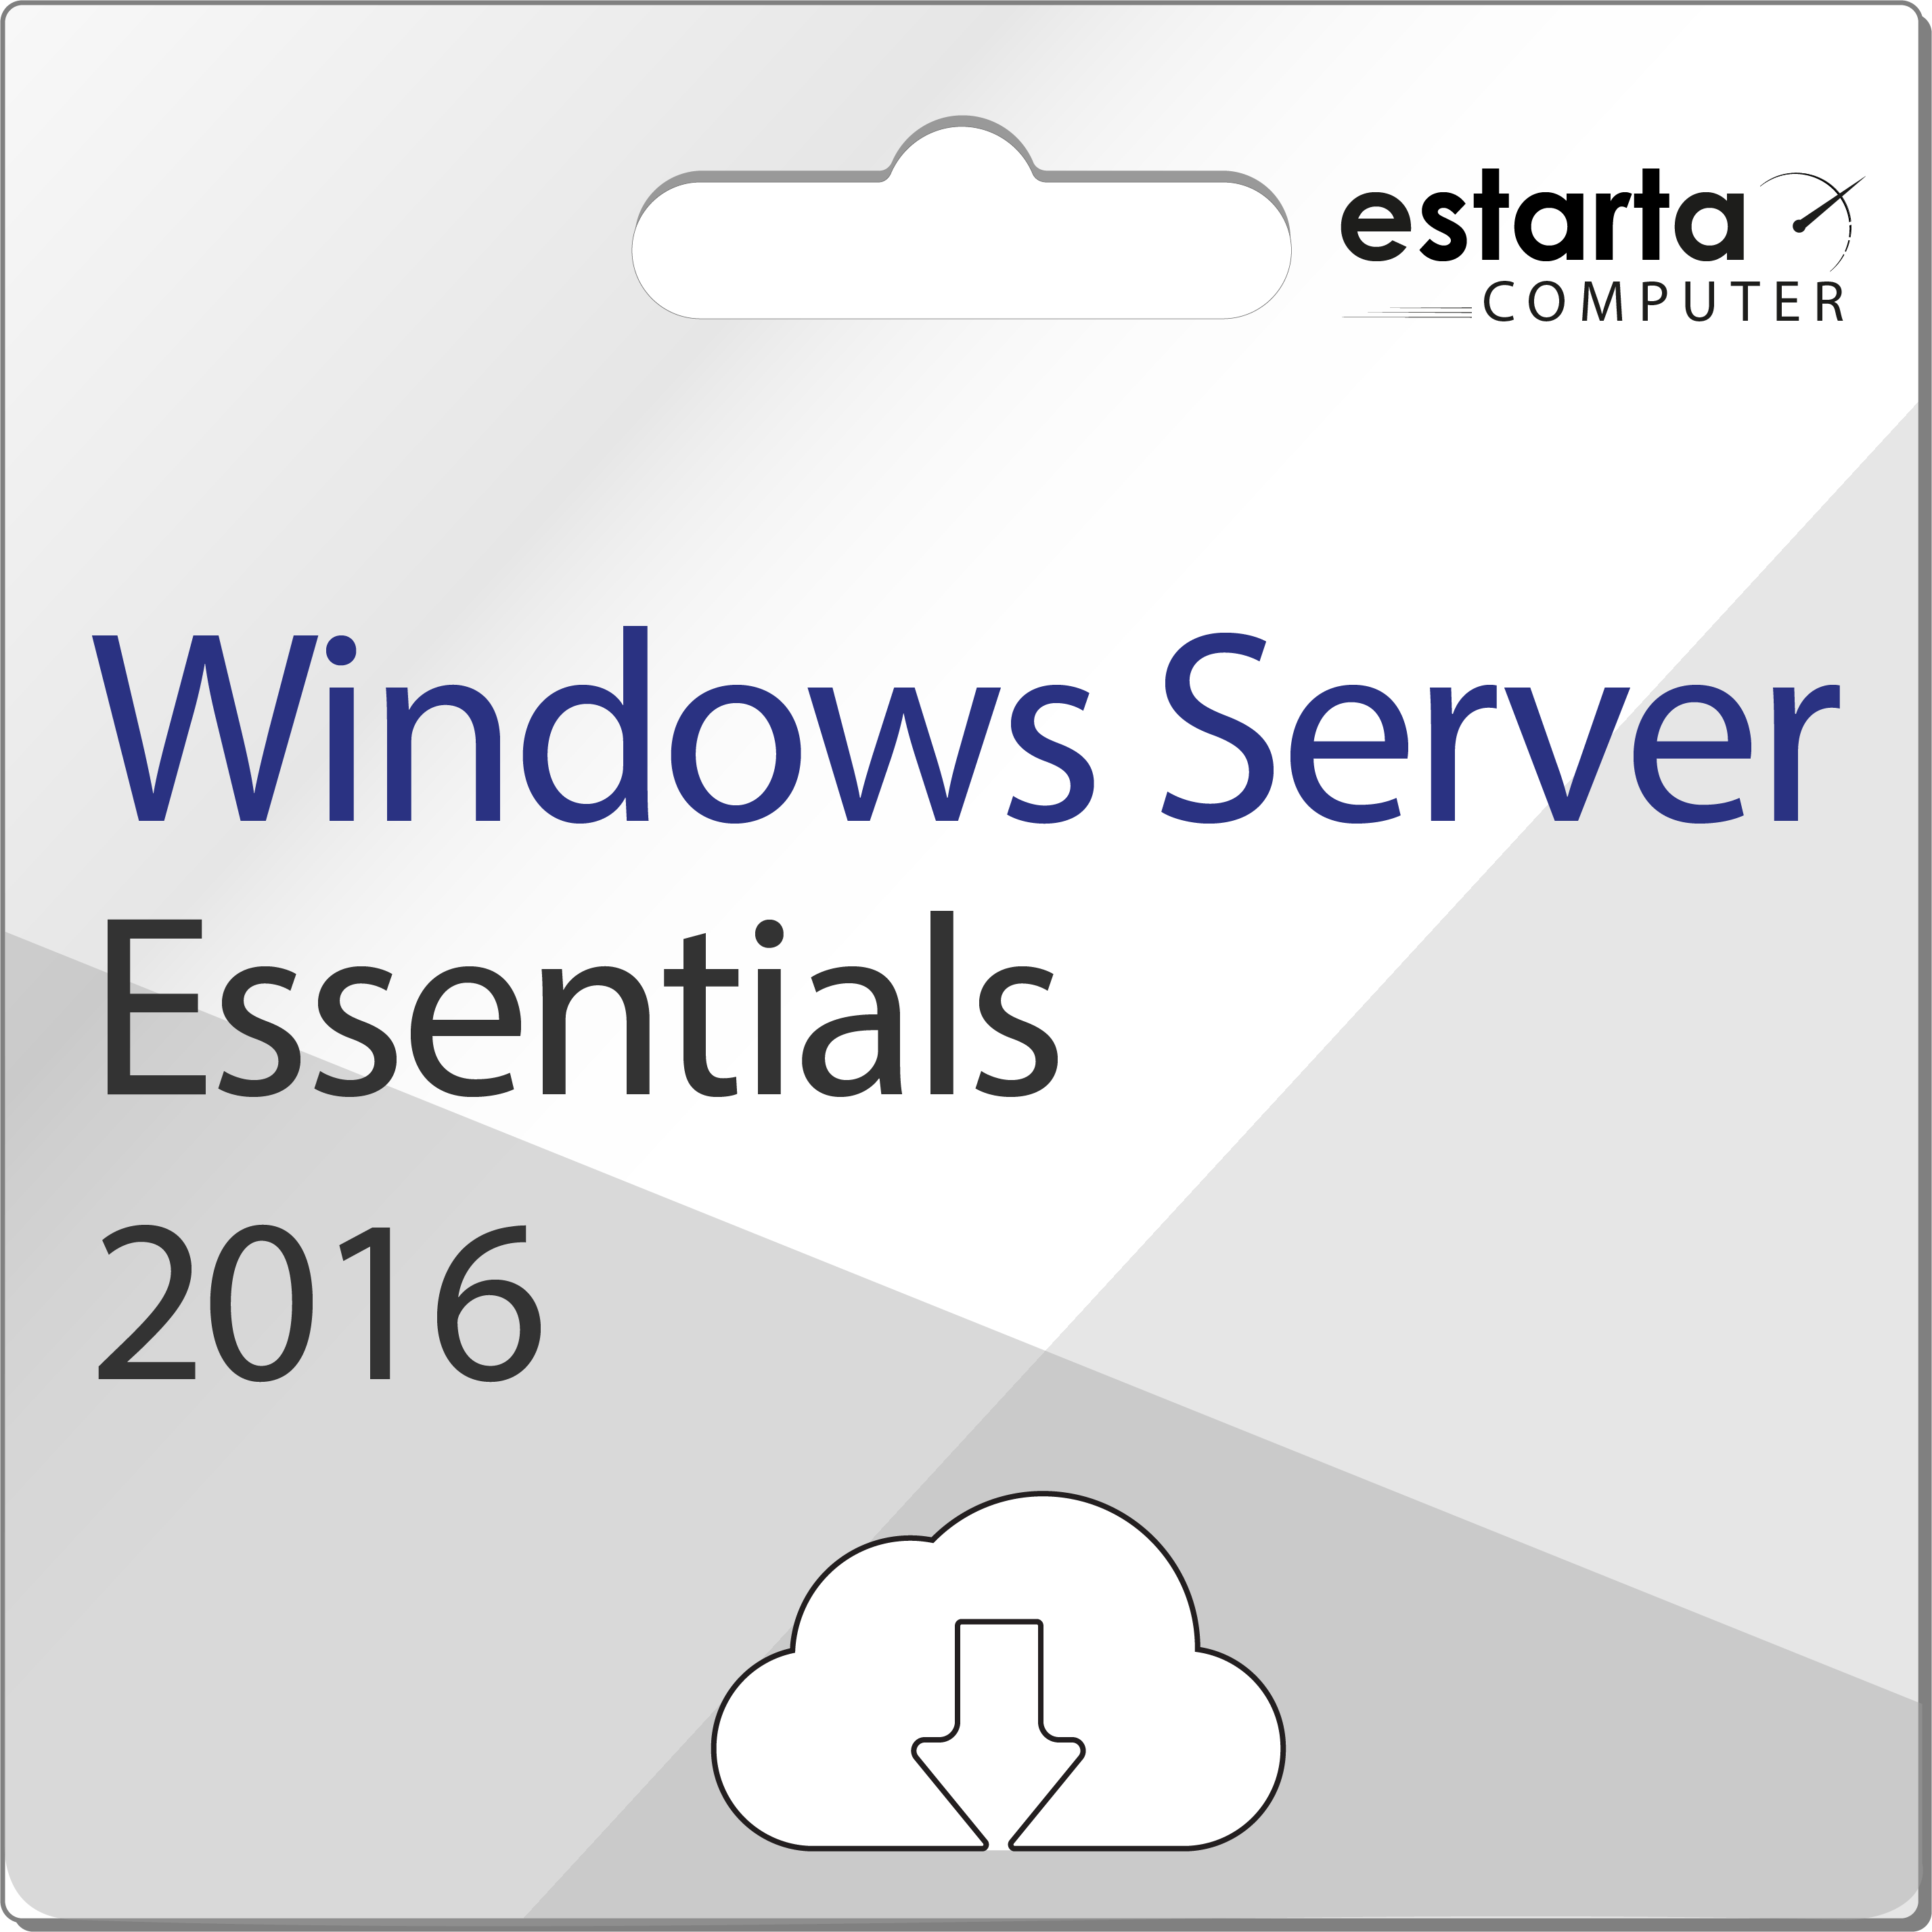 Microsoft Windows Server 2016 Essentials up to 25 users Multilingual